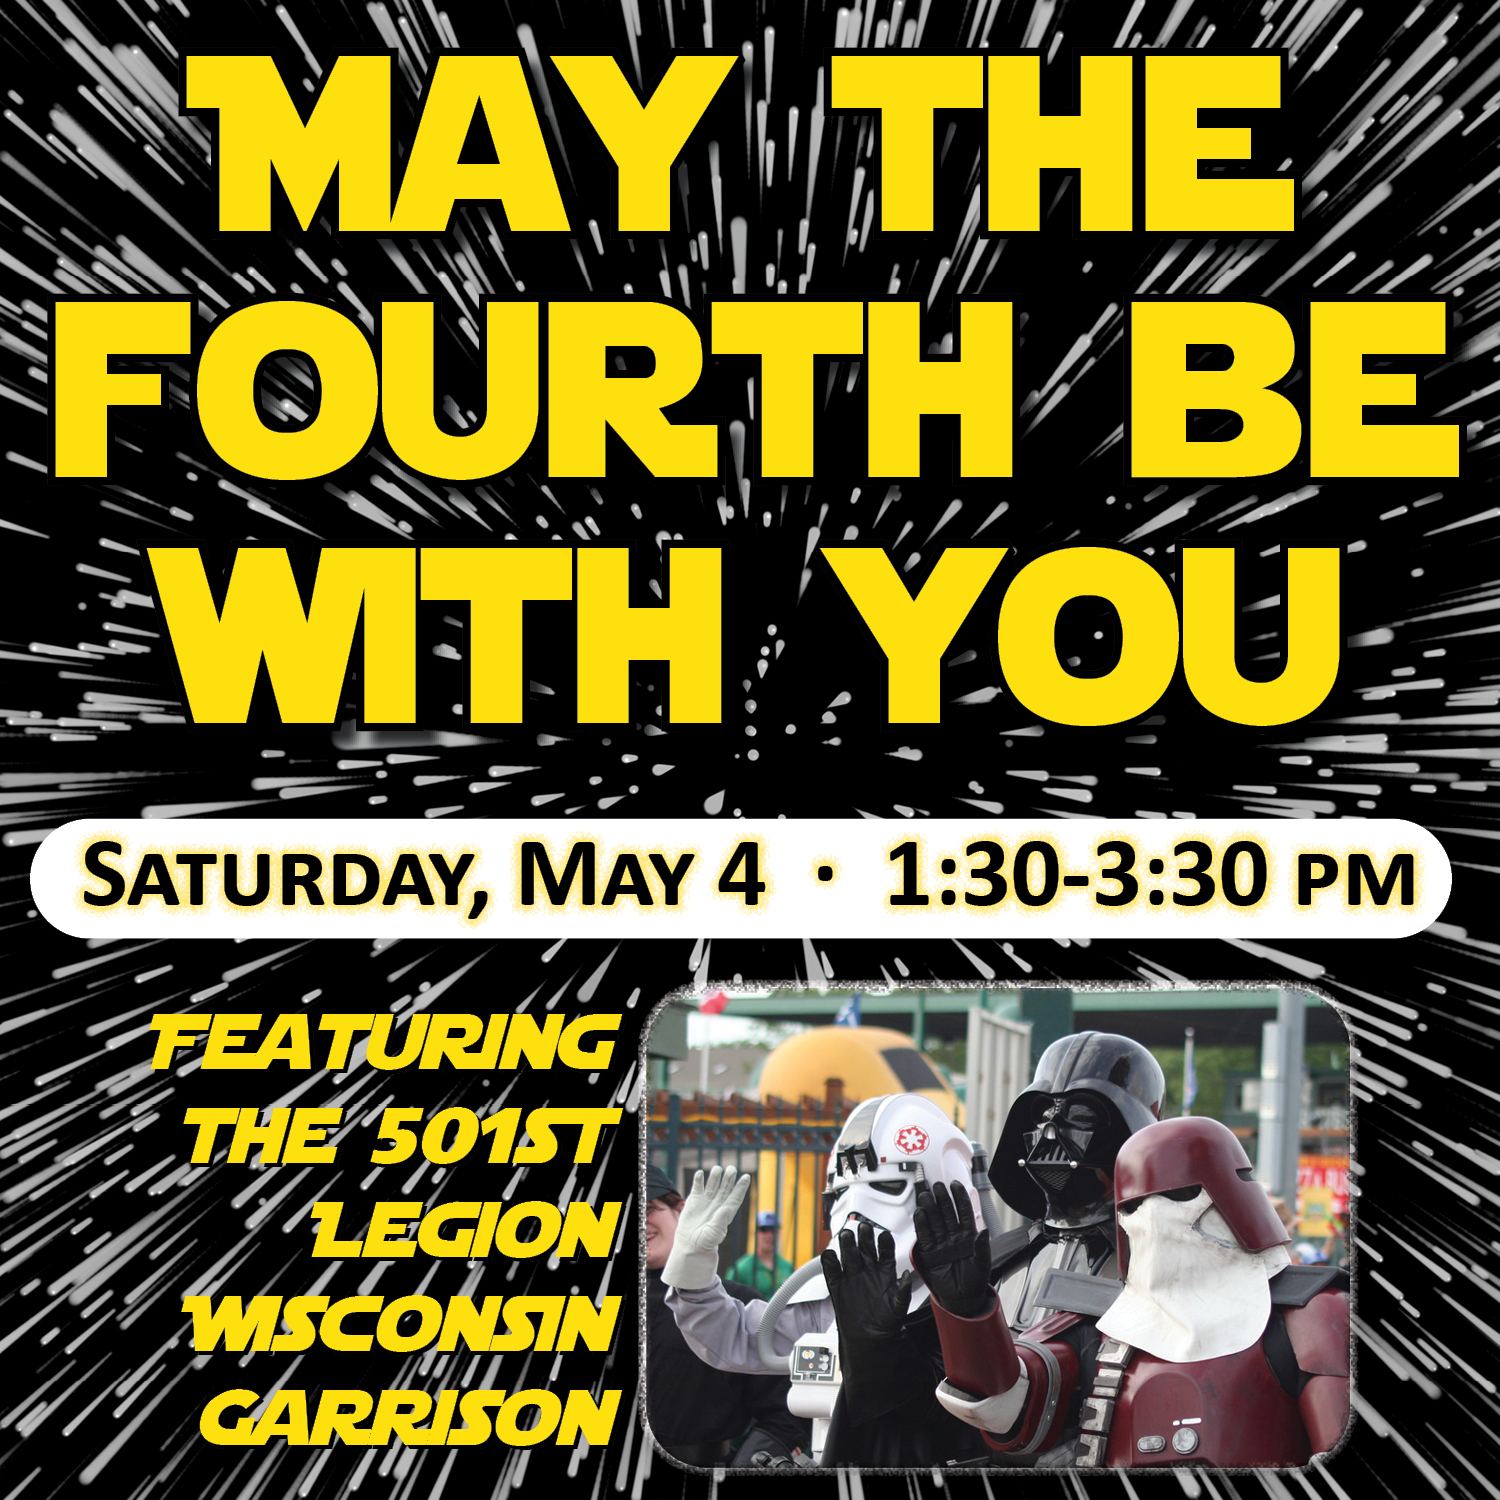 Go on a galactic adventure with May the Fourth at the Fond du Lac Public Library